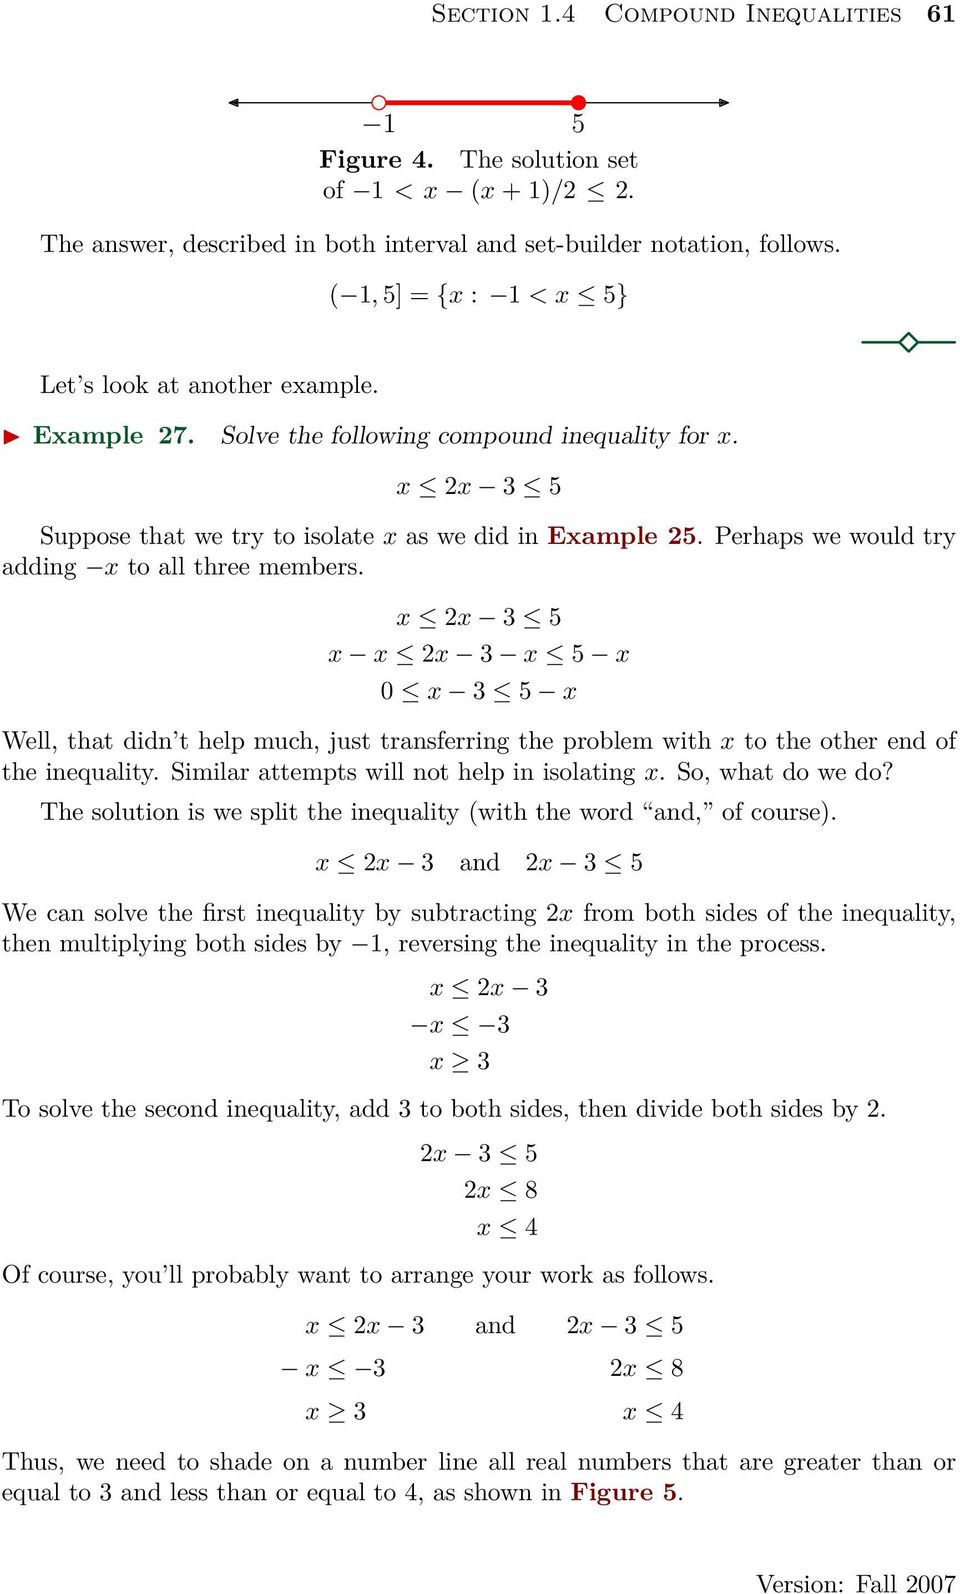 Solving Compound Inequalities Worksheet 1 4 Pound Inequalities Pdf Free Download